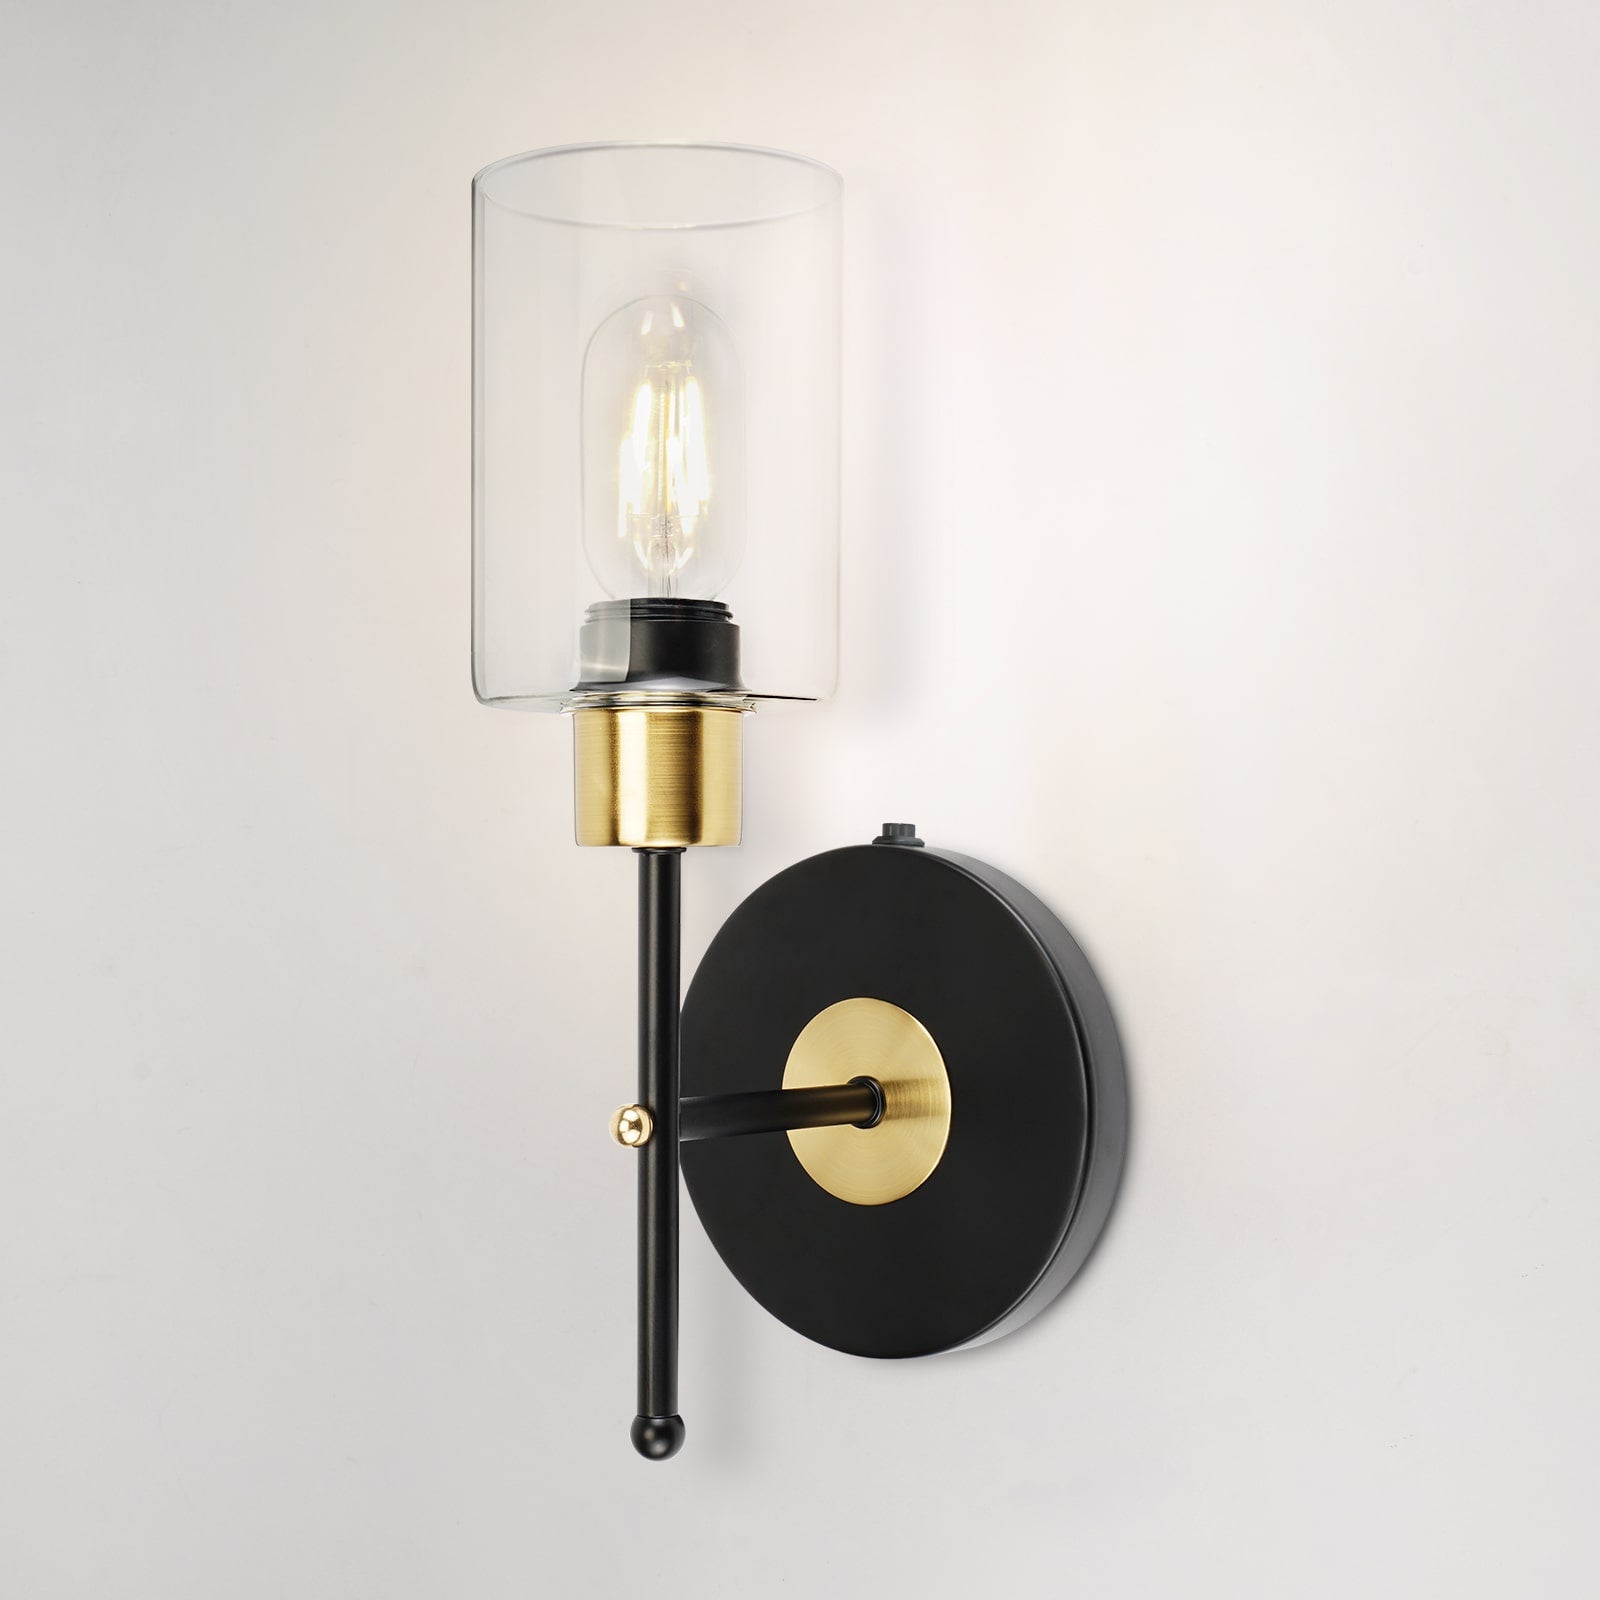 C01 Battery Operated Wall Lamp for Kitchen Room